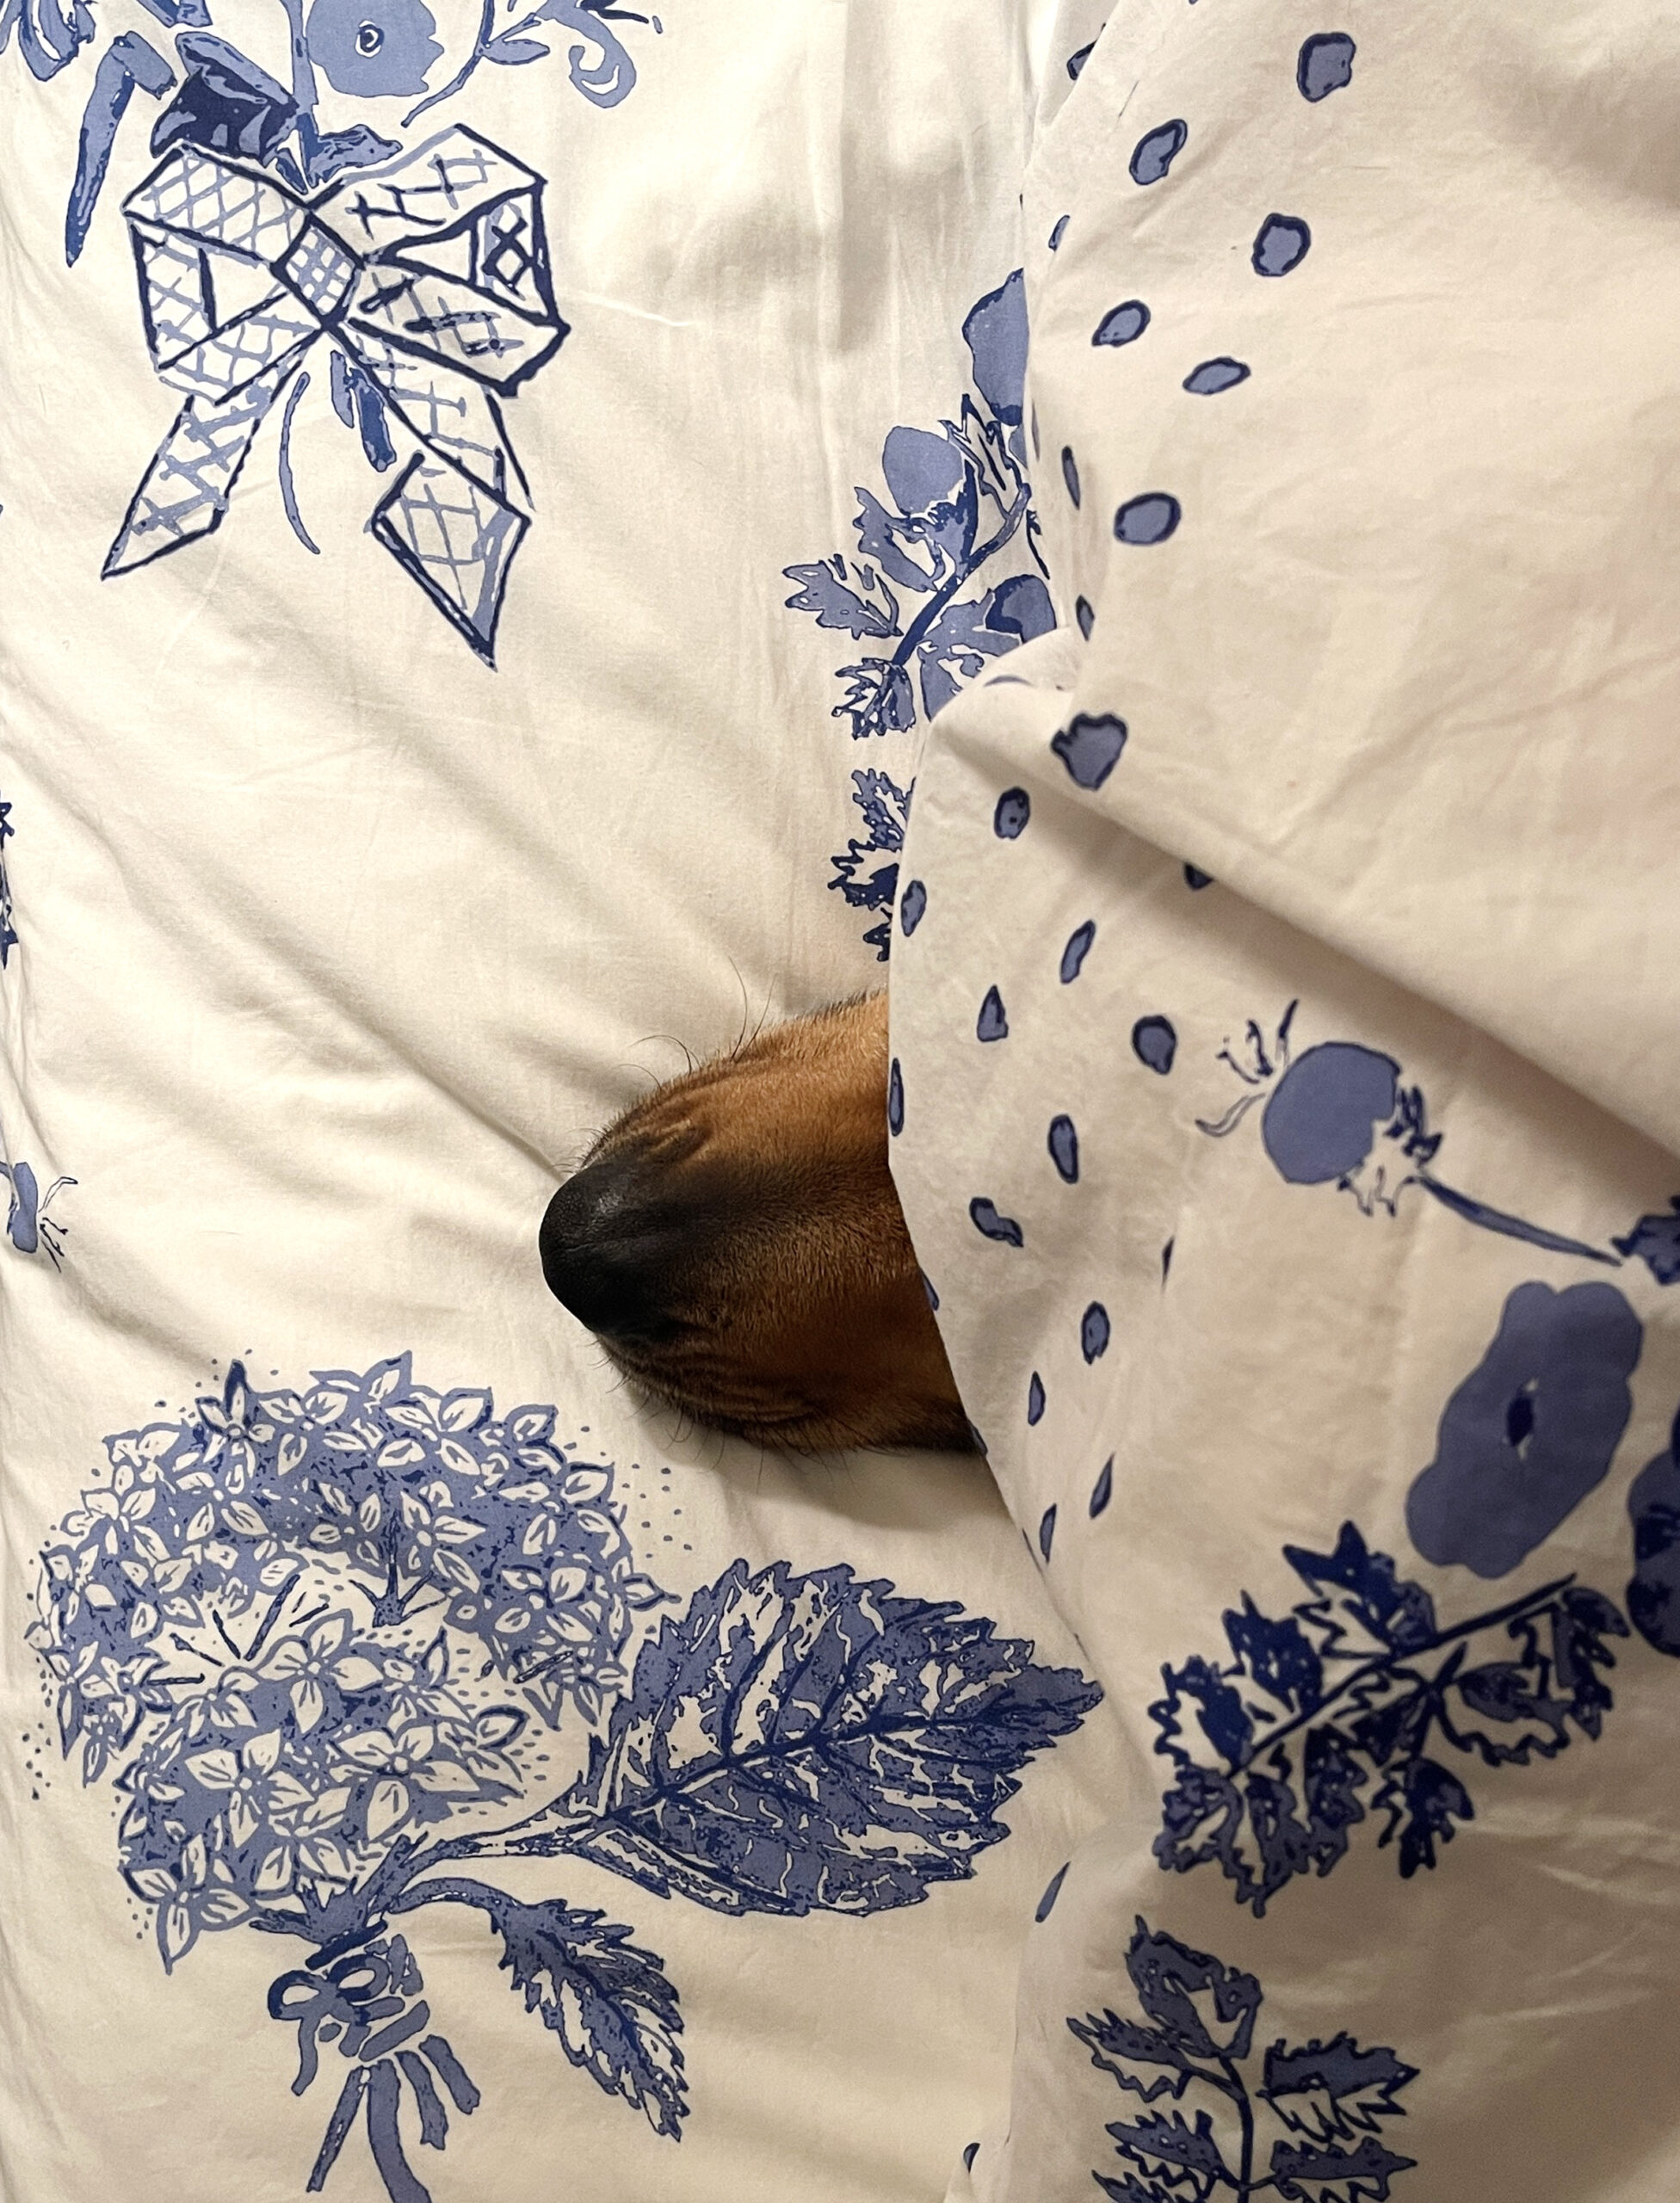 Brown dog nose snuggling in blue white floral bed